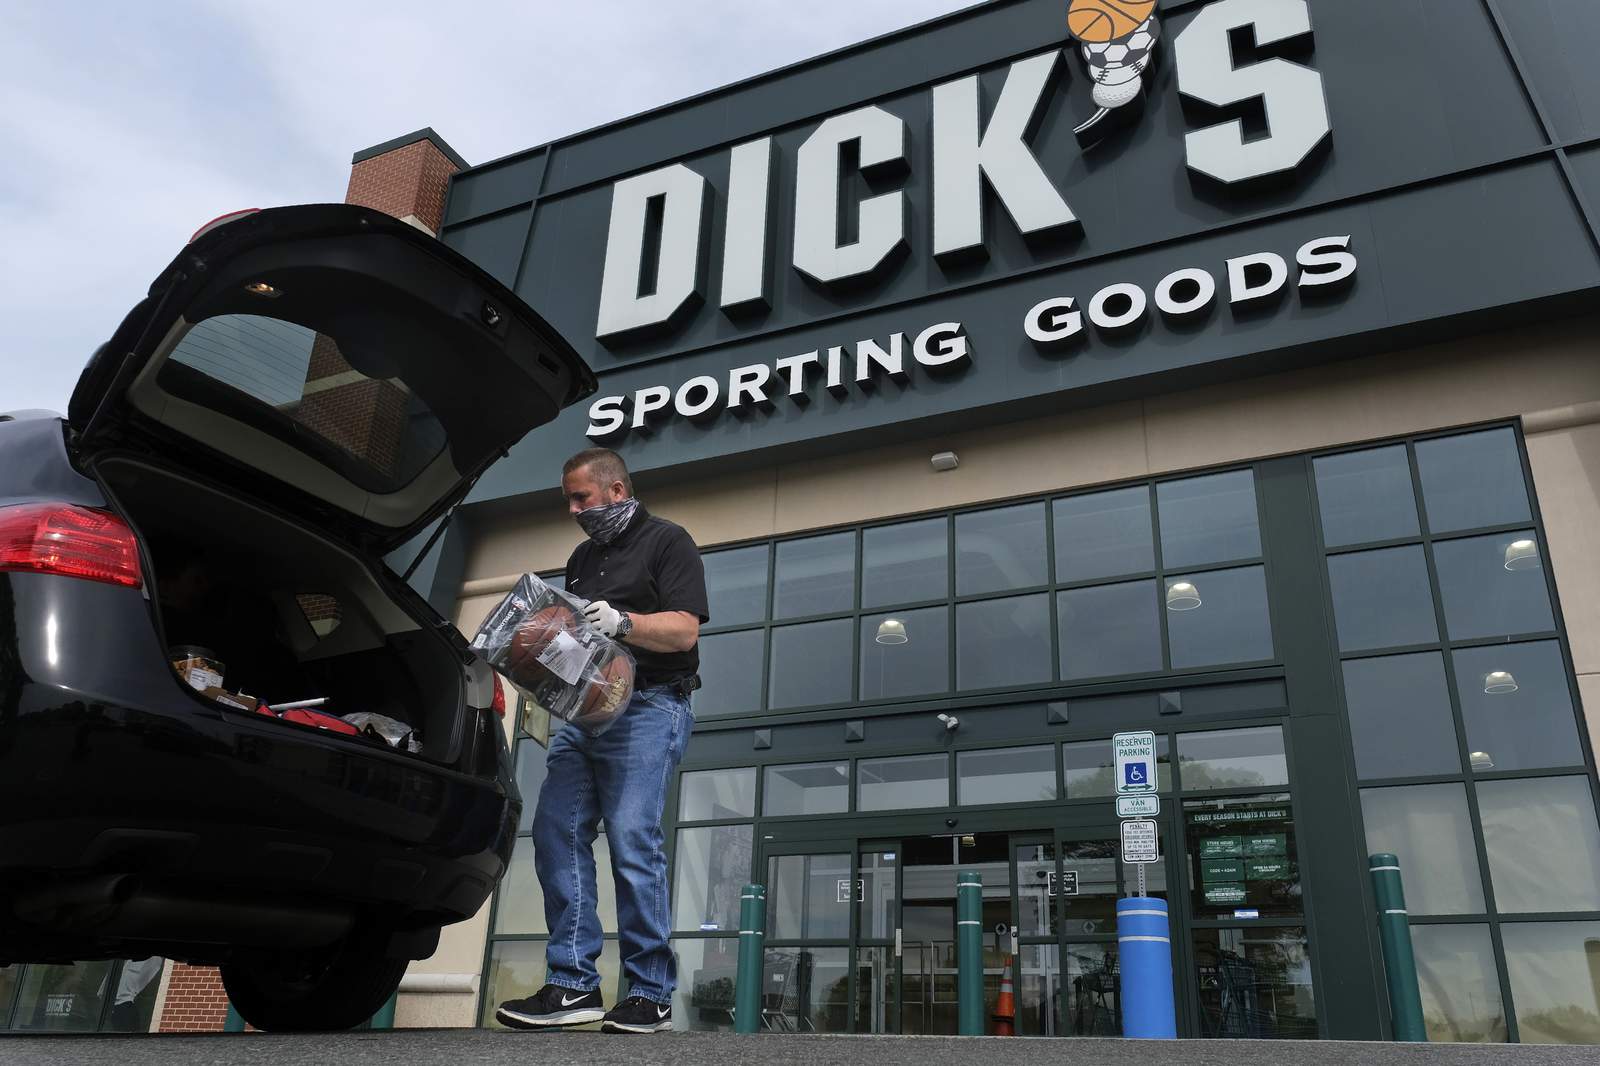 No sweat: Dick's crushes 2Q as consumers focus on fitness